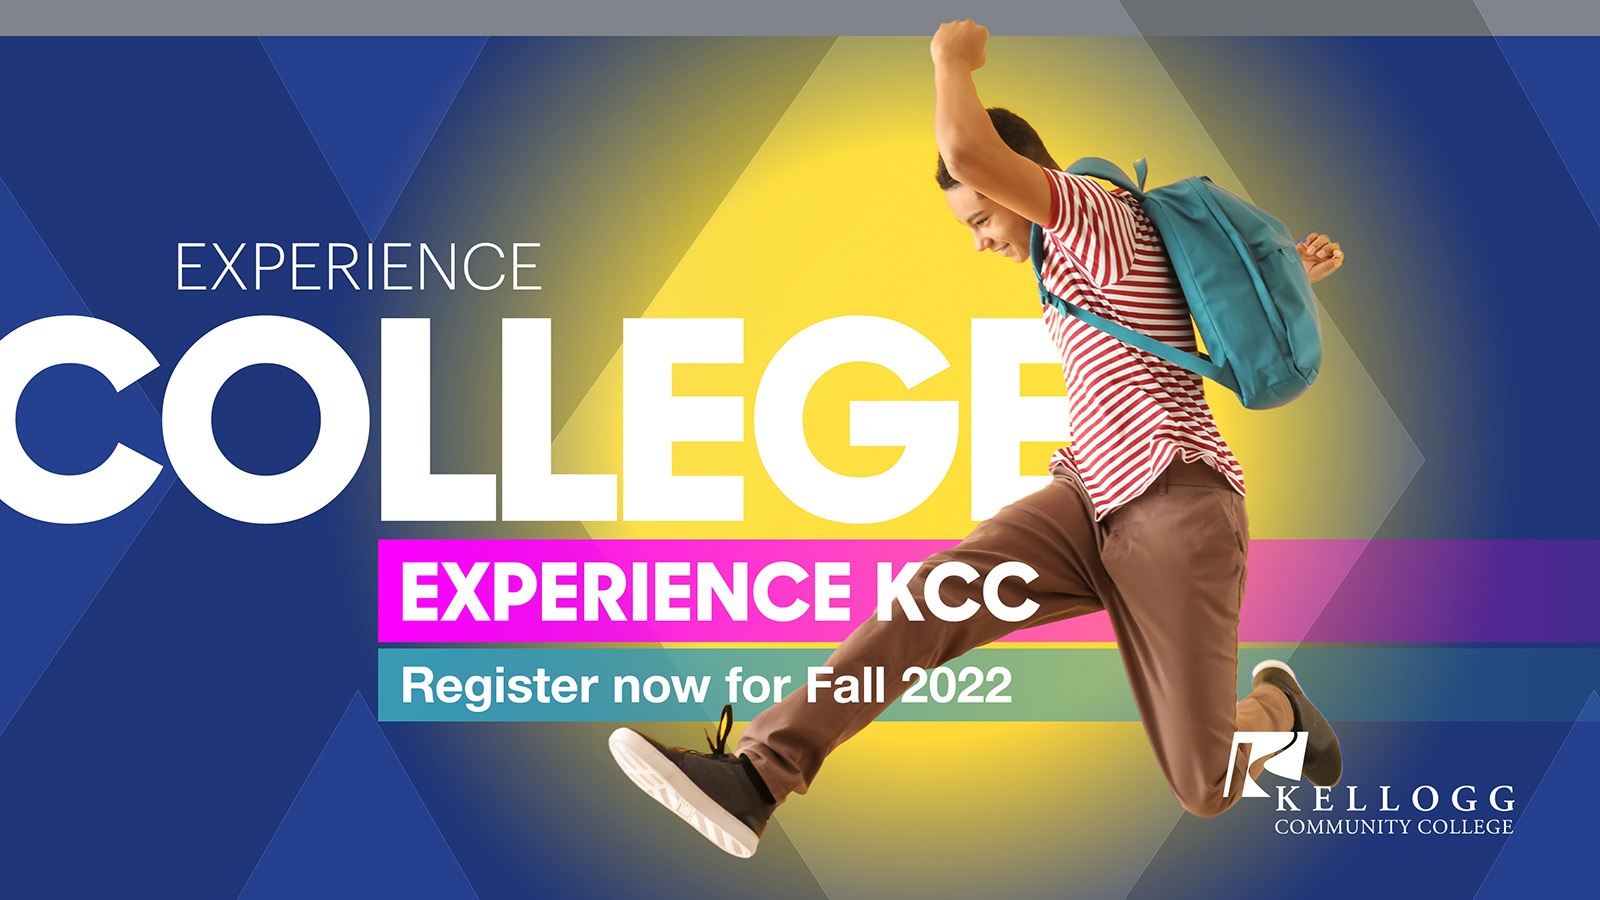 A male student in a backpack jumps on a stylized slide that reads "Experience college. Experience KCC. Register now for Fall 2022."